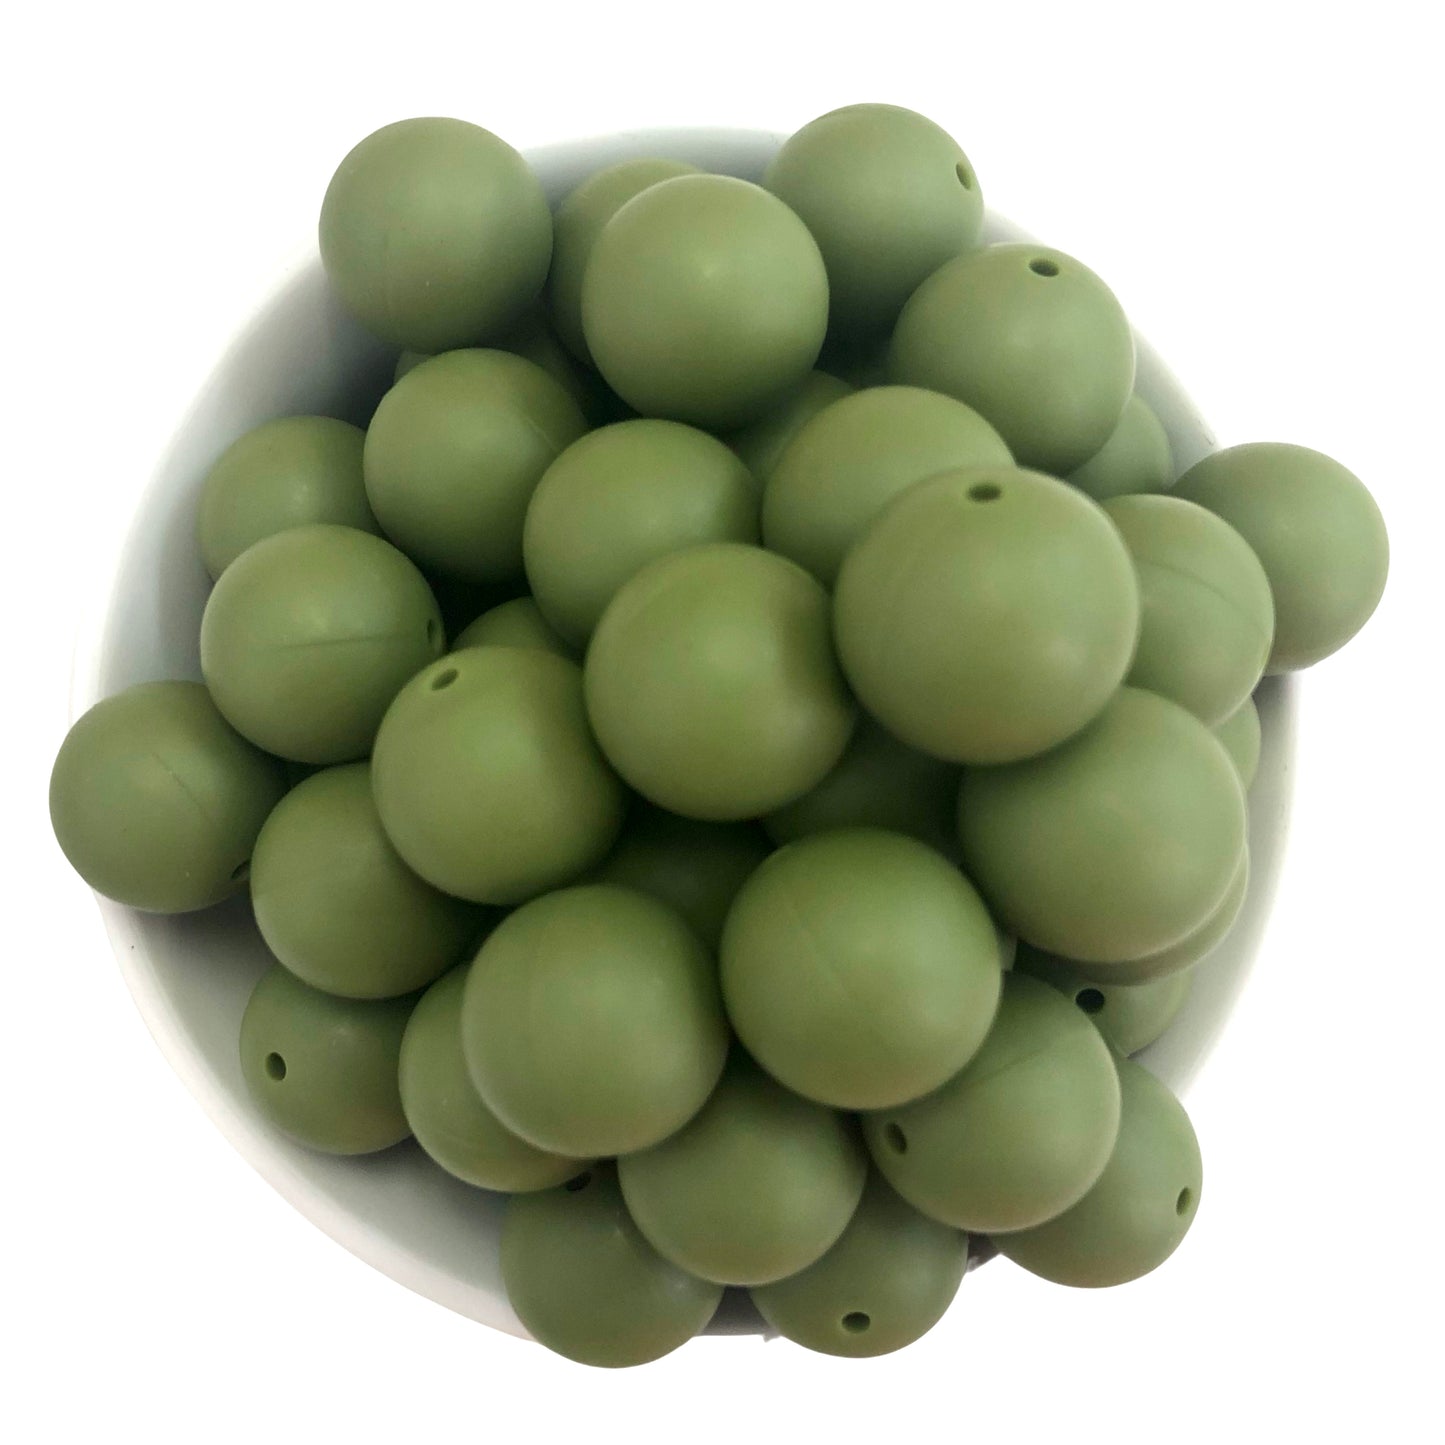 Olive Branch 15mm Silicone Beads - 10 pk.